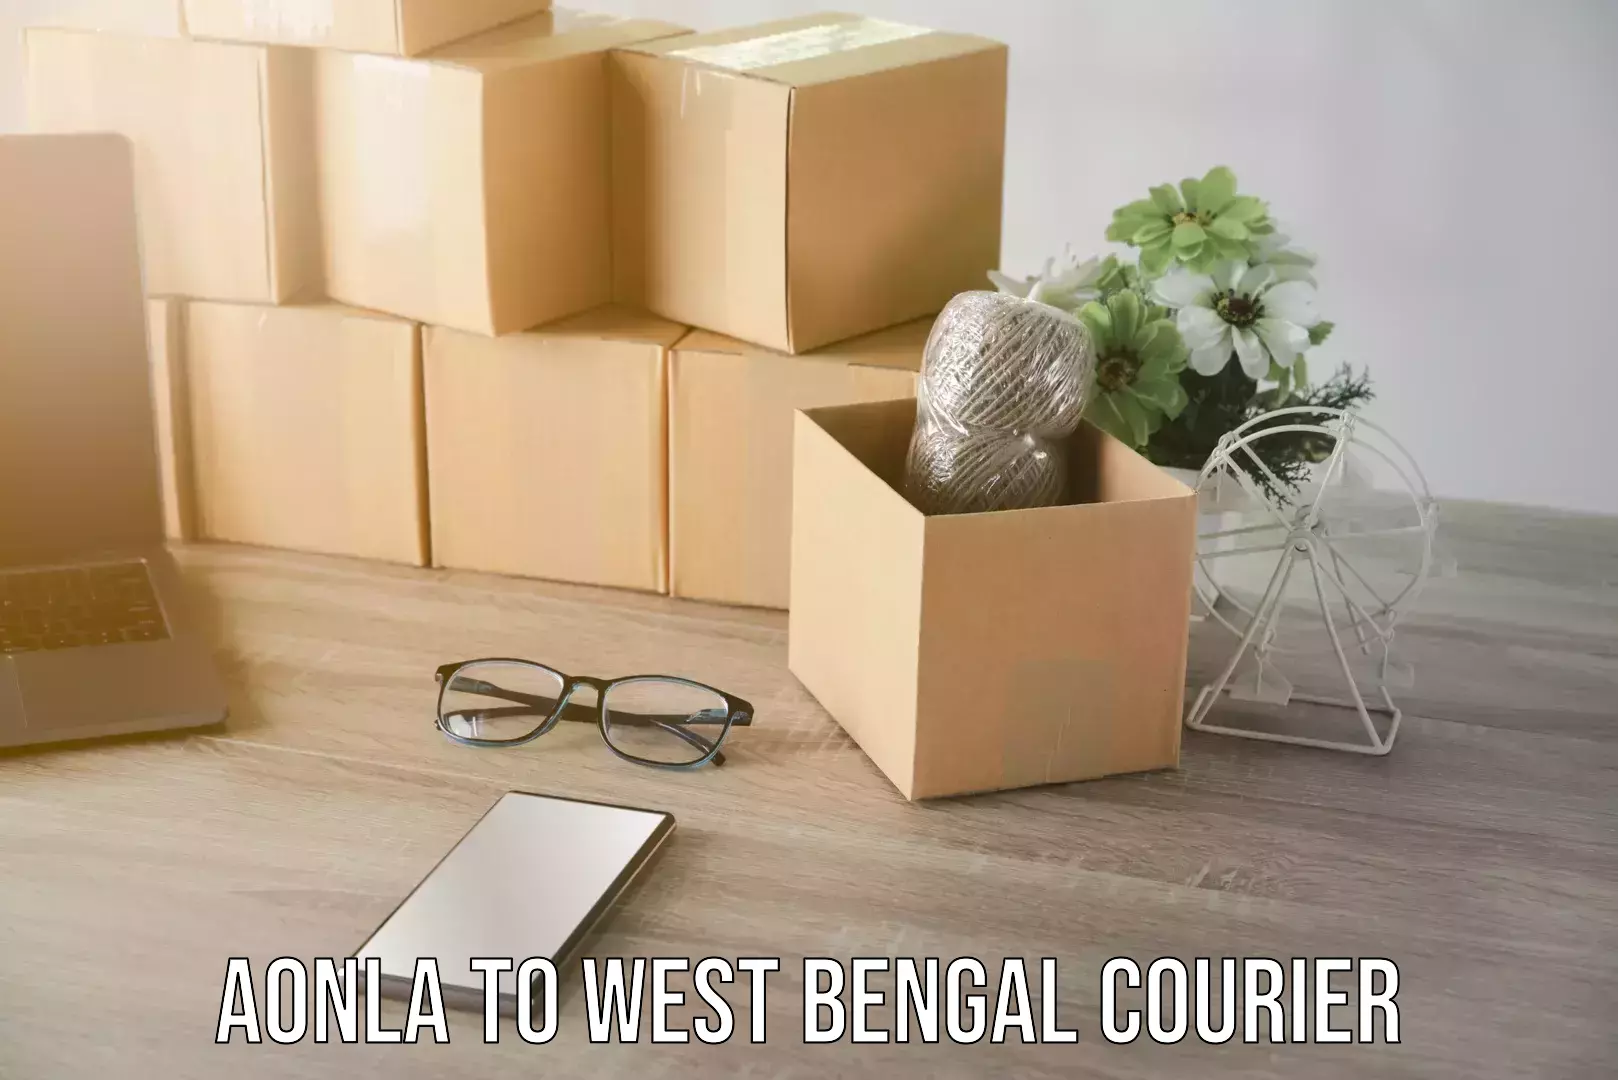 Lightweight parcel options Aonla to West Bengal